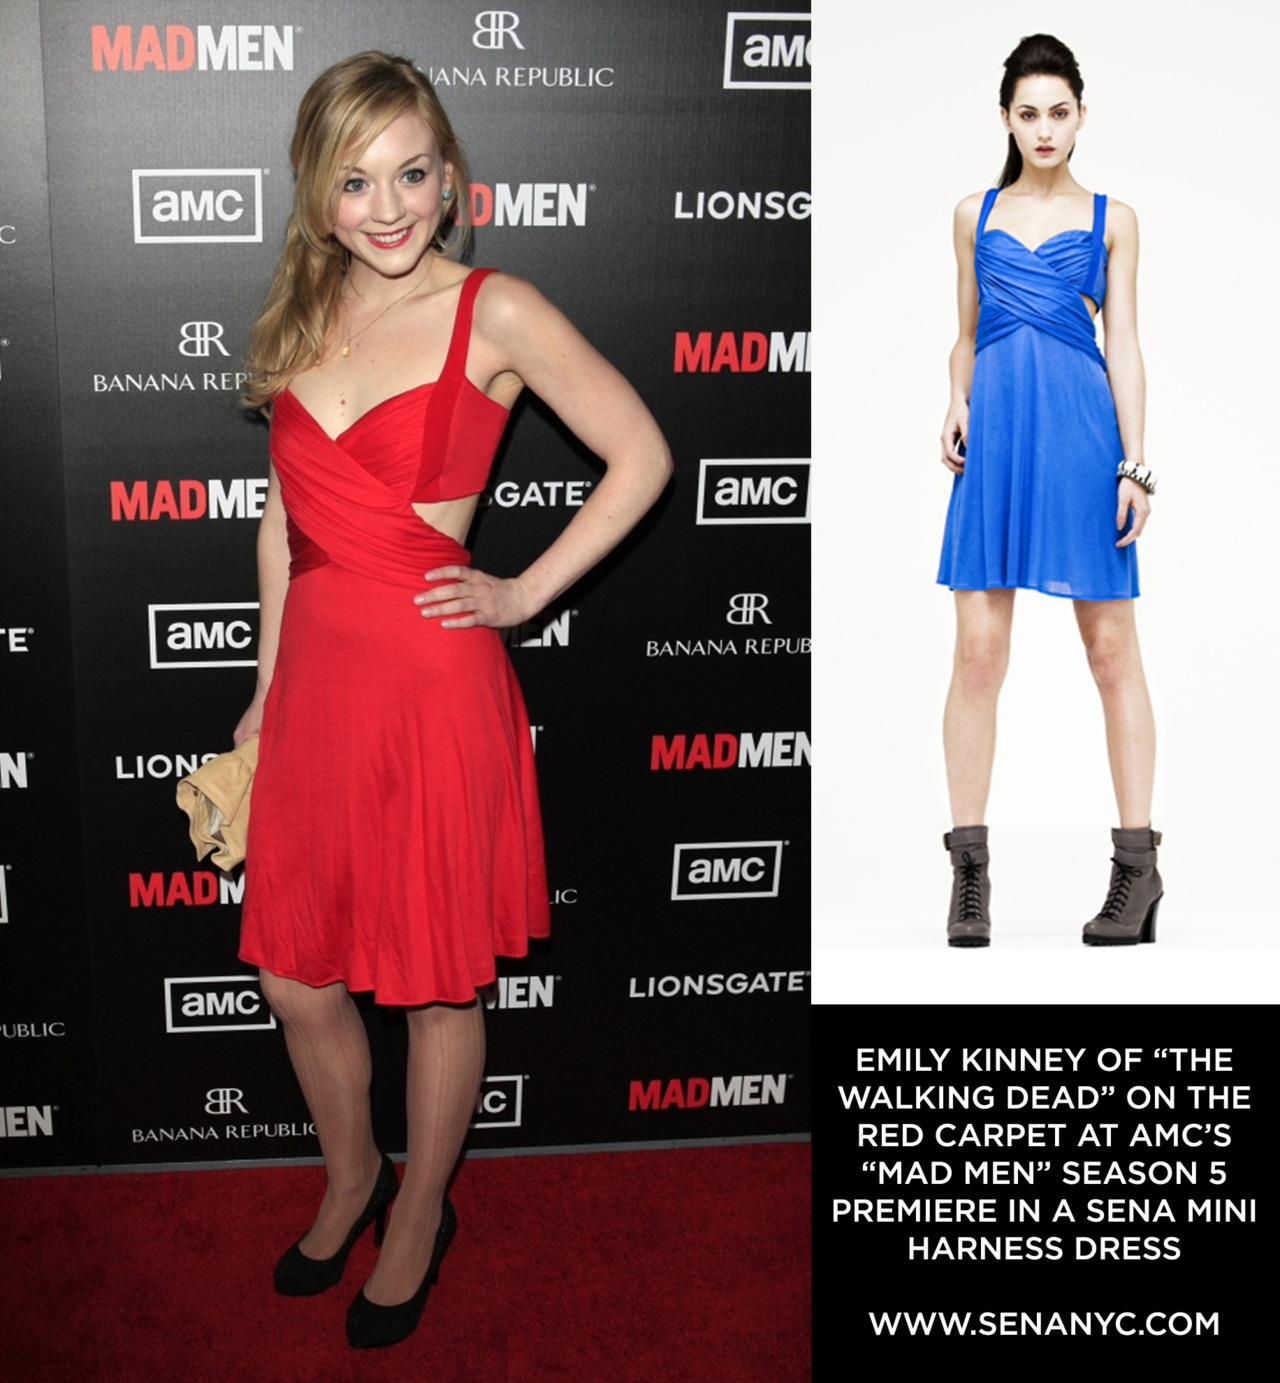 Emily Kinney of “The Walking Dead” rocks the red carpet at the “Mad Men” Season 5 Premiere in a SENA Mini Harness Dress. Emily looks beautiful!
Want your own SENA Mini Harness Dress? Just your luck, it’s is available here for purchase.